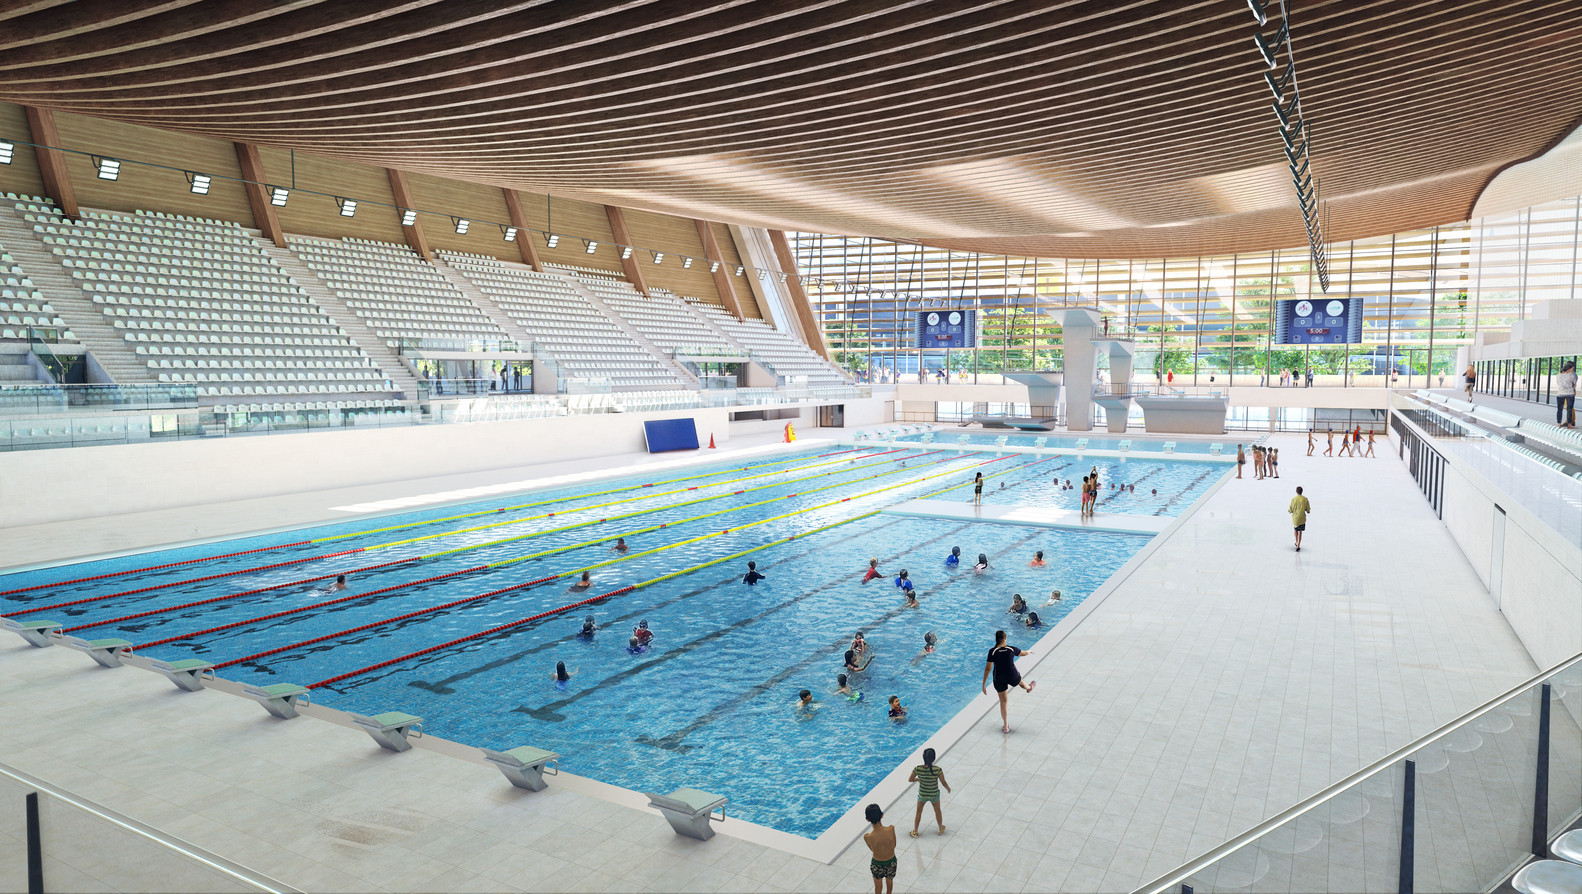 Design of proposed Paris 2024 Aquatics Centre revealed by competition winners